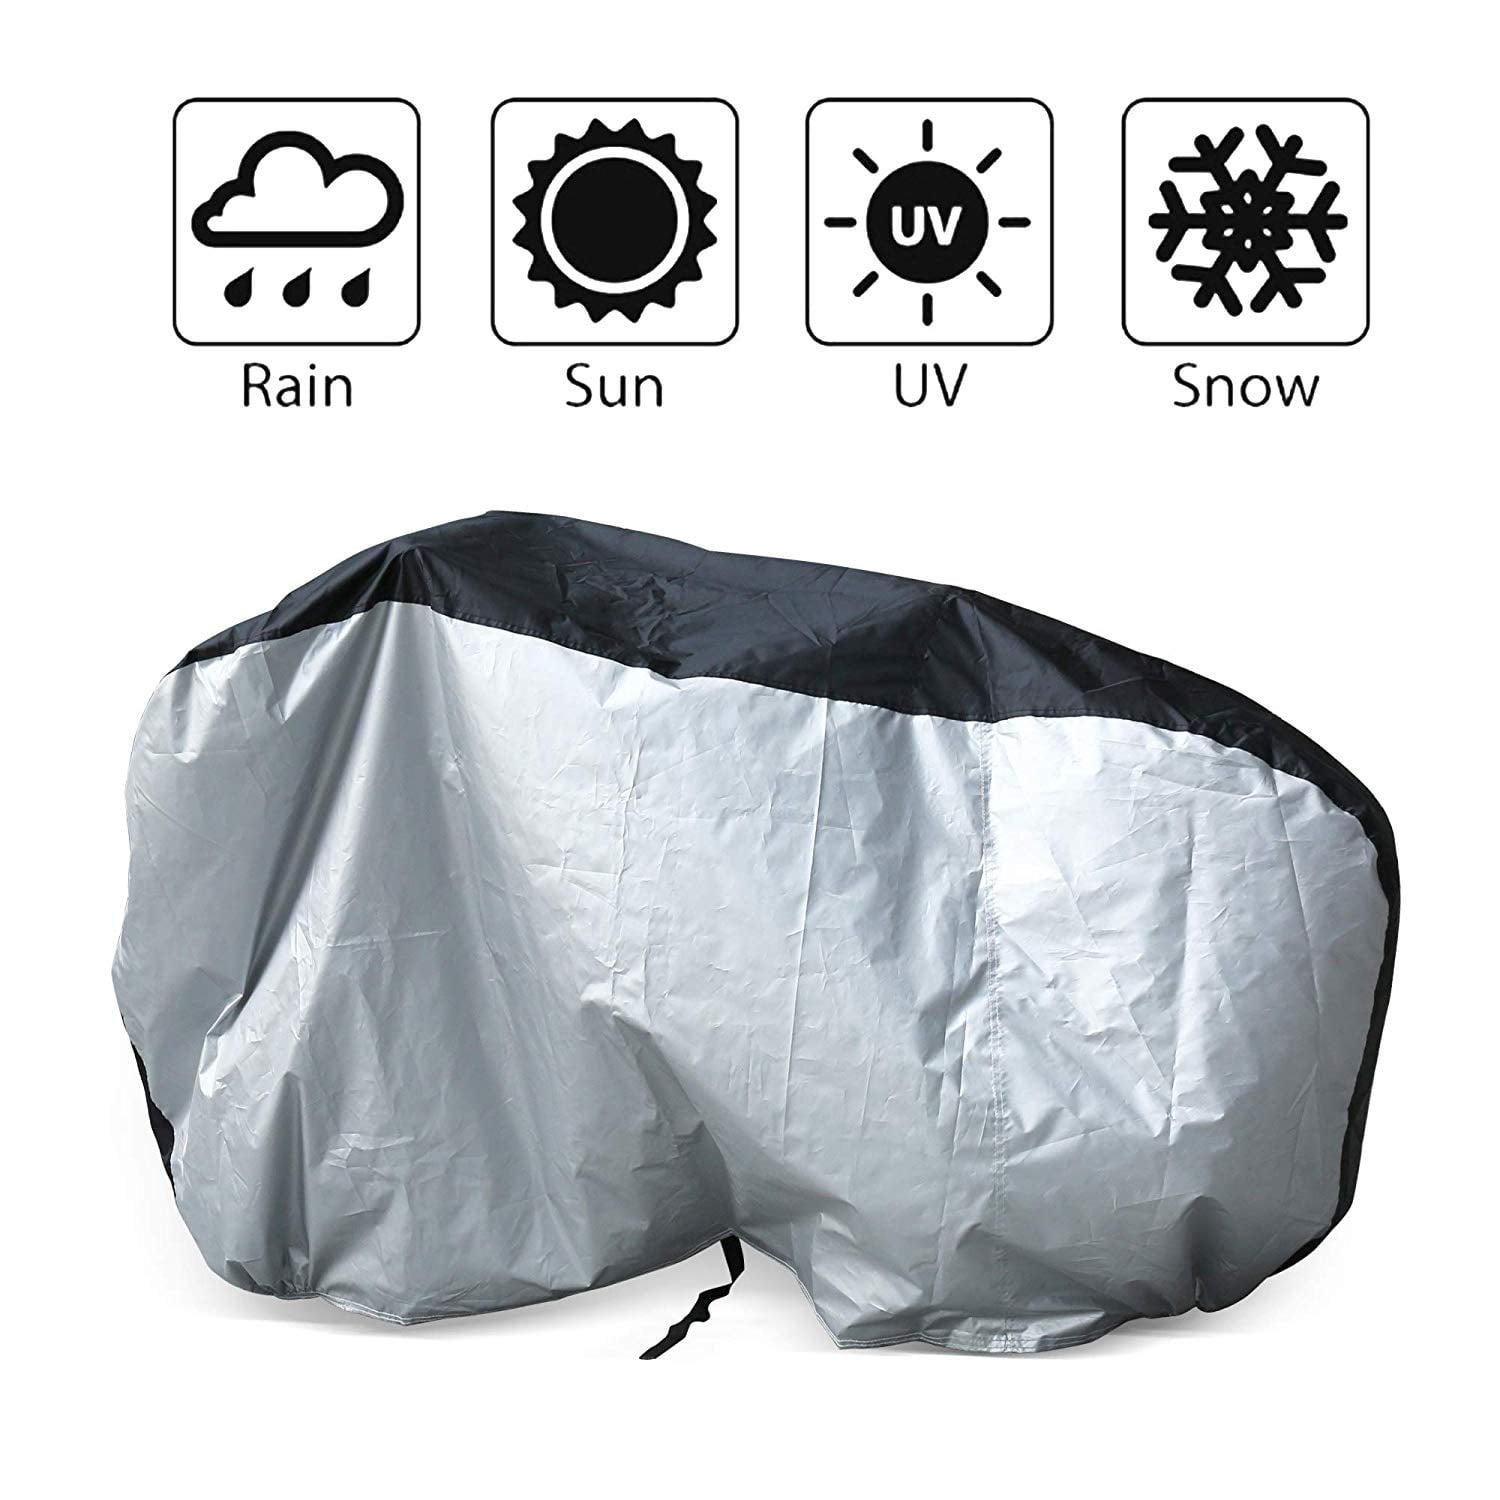 VK Waterproof Single Bike Cover WITH CORD Keep Bicycle Outdoors Clean/Dry NEW 